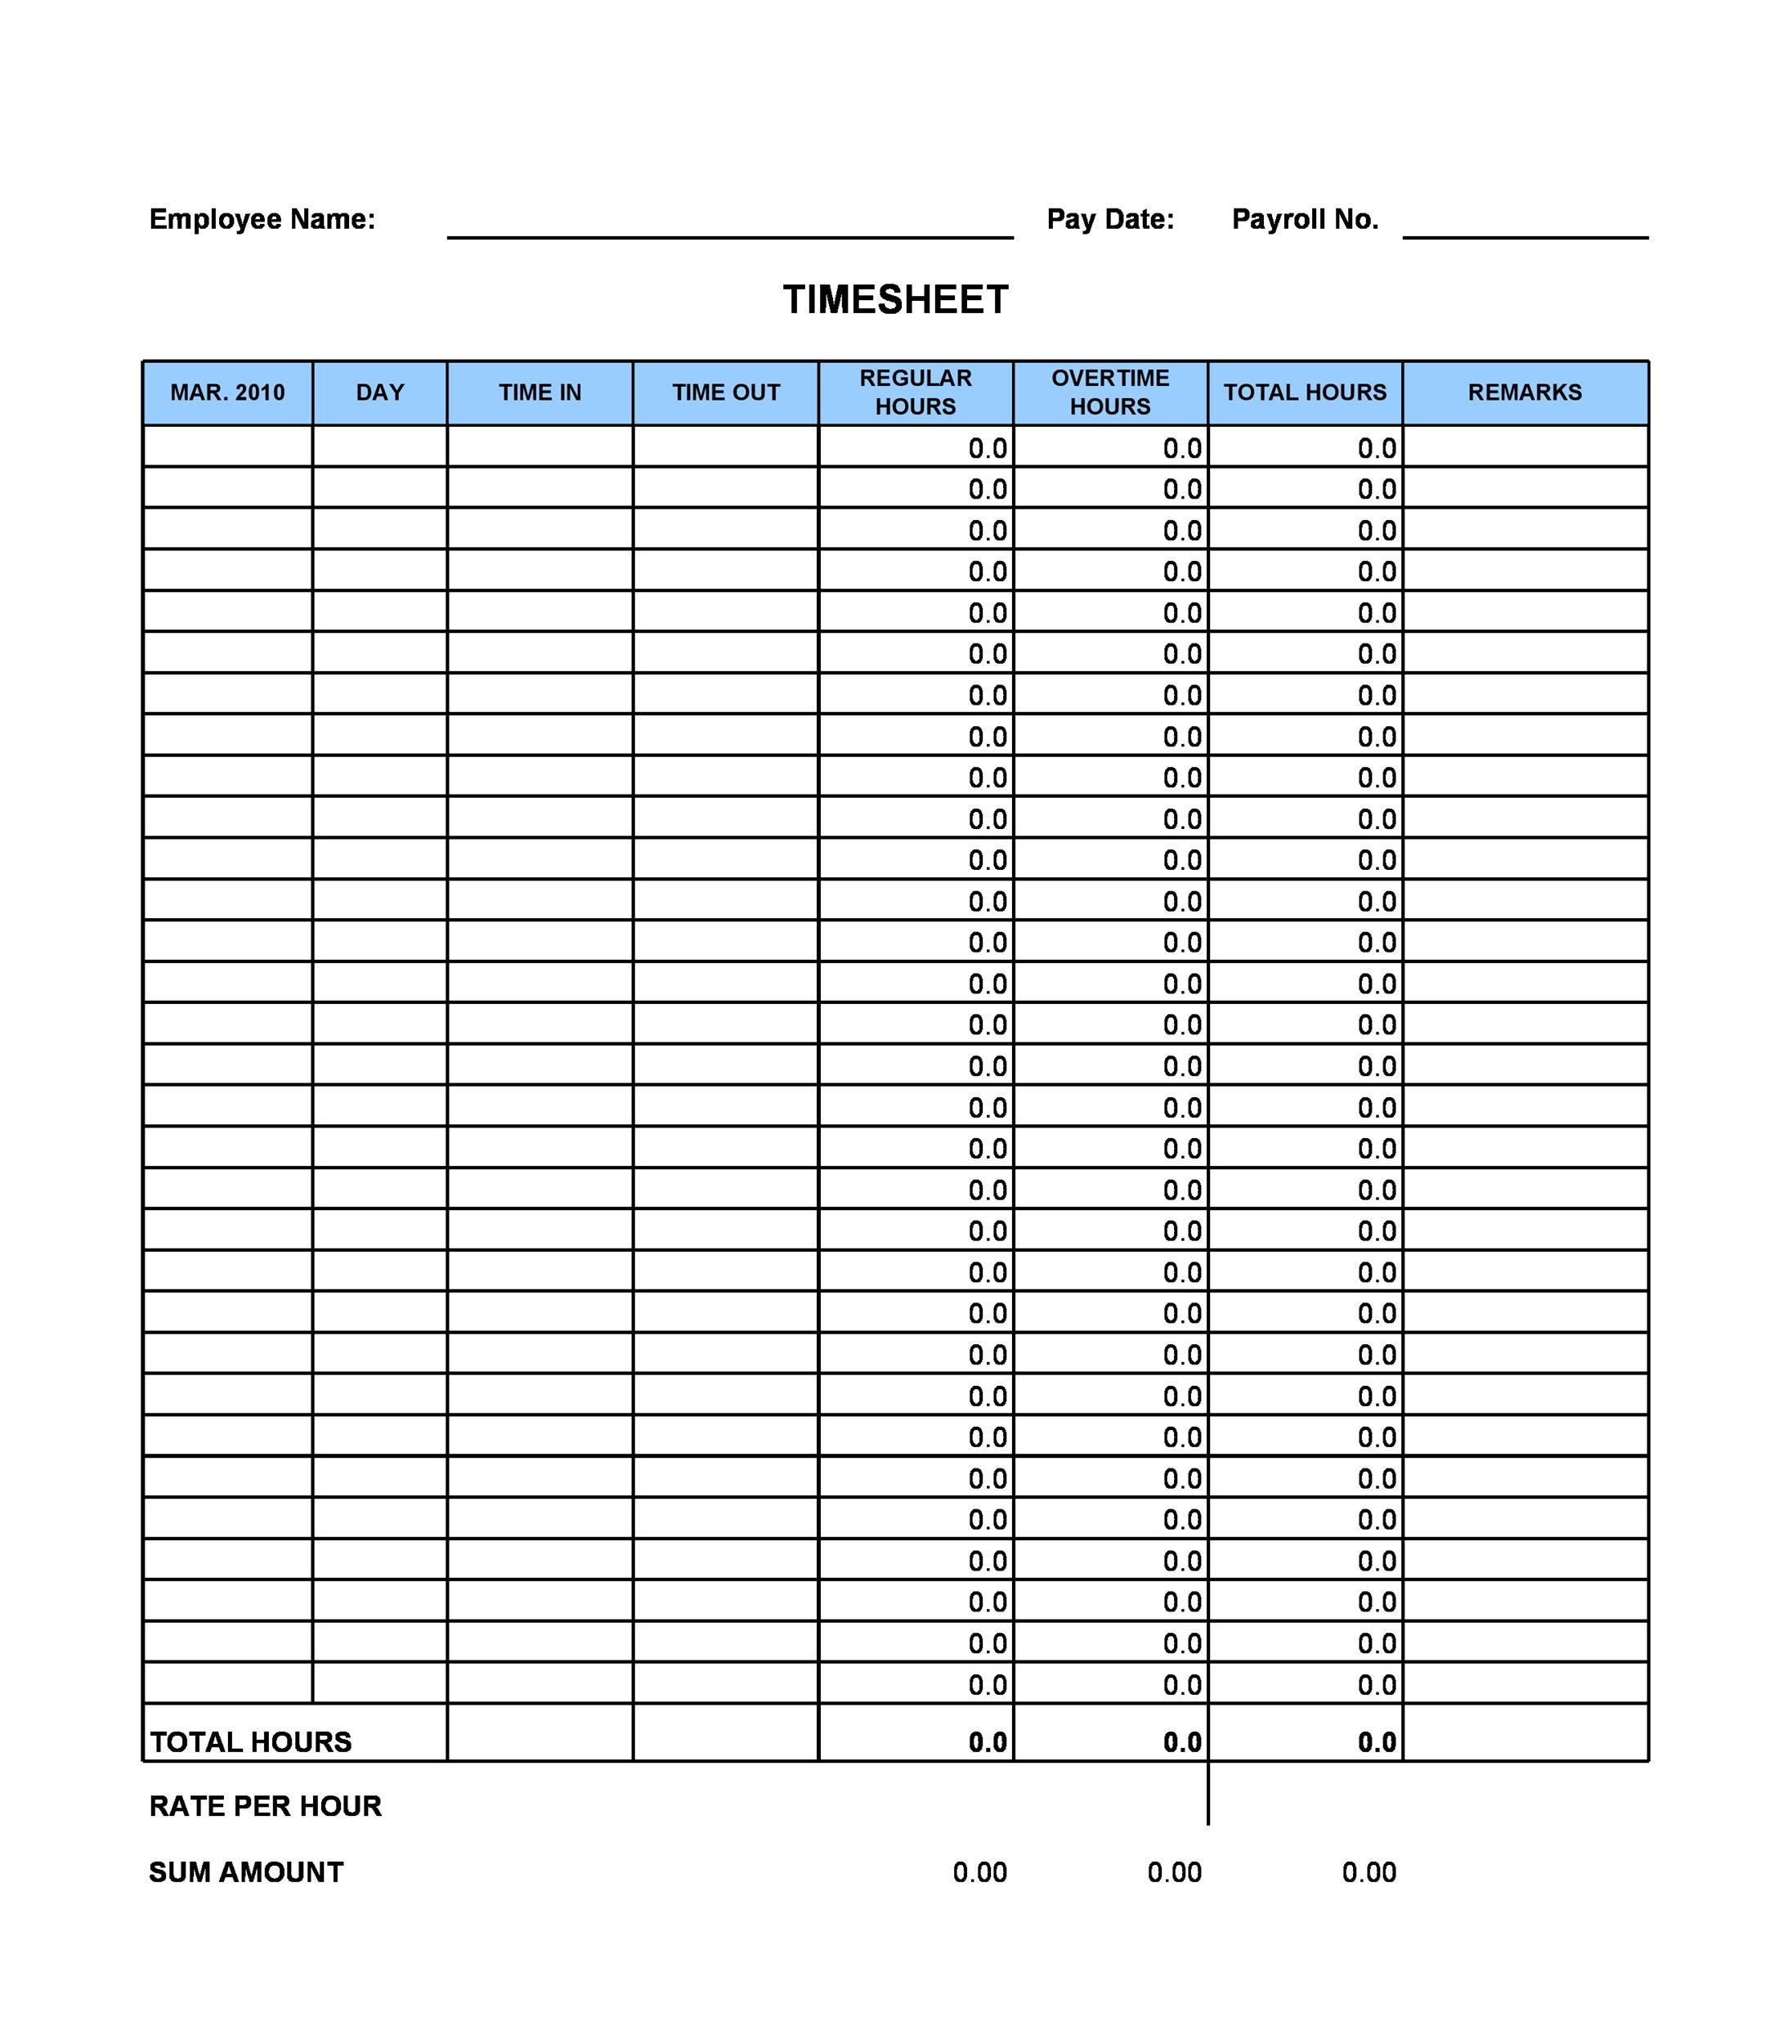 40 Free Timesheet Templates in Excel ᐅ TemplateLab